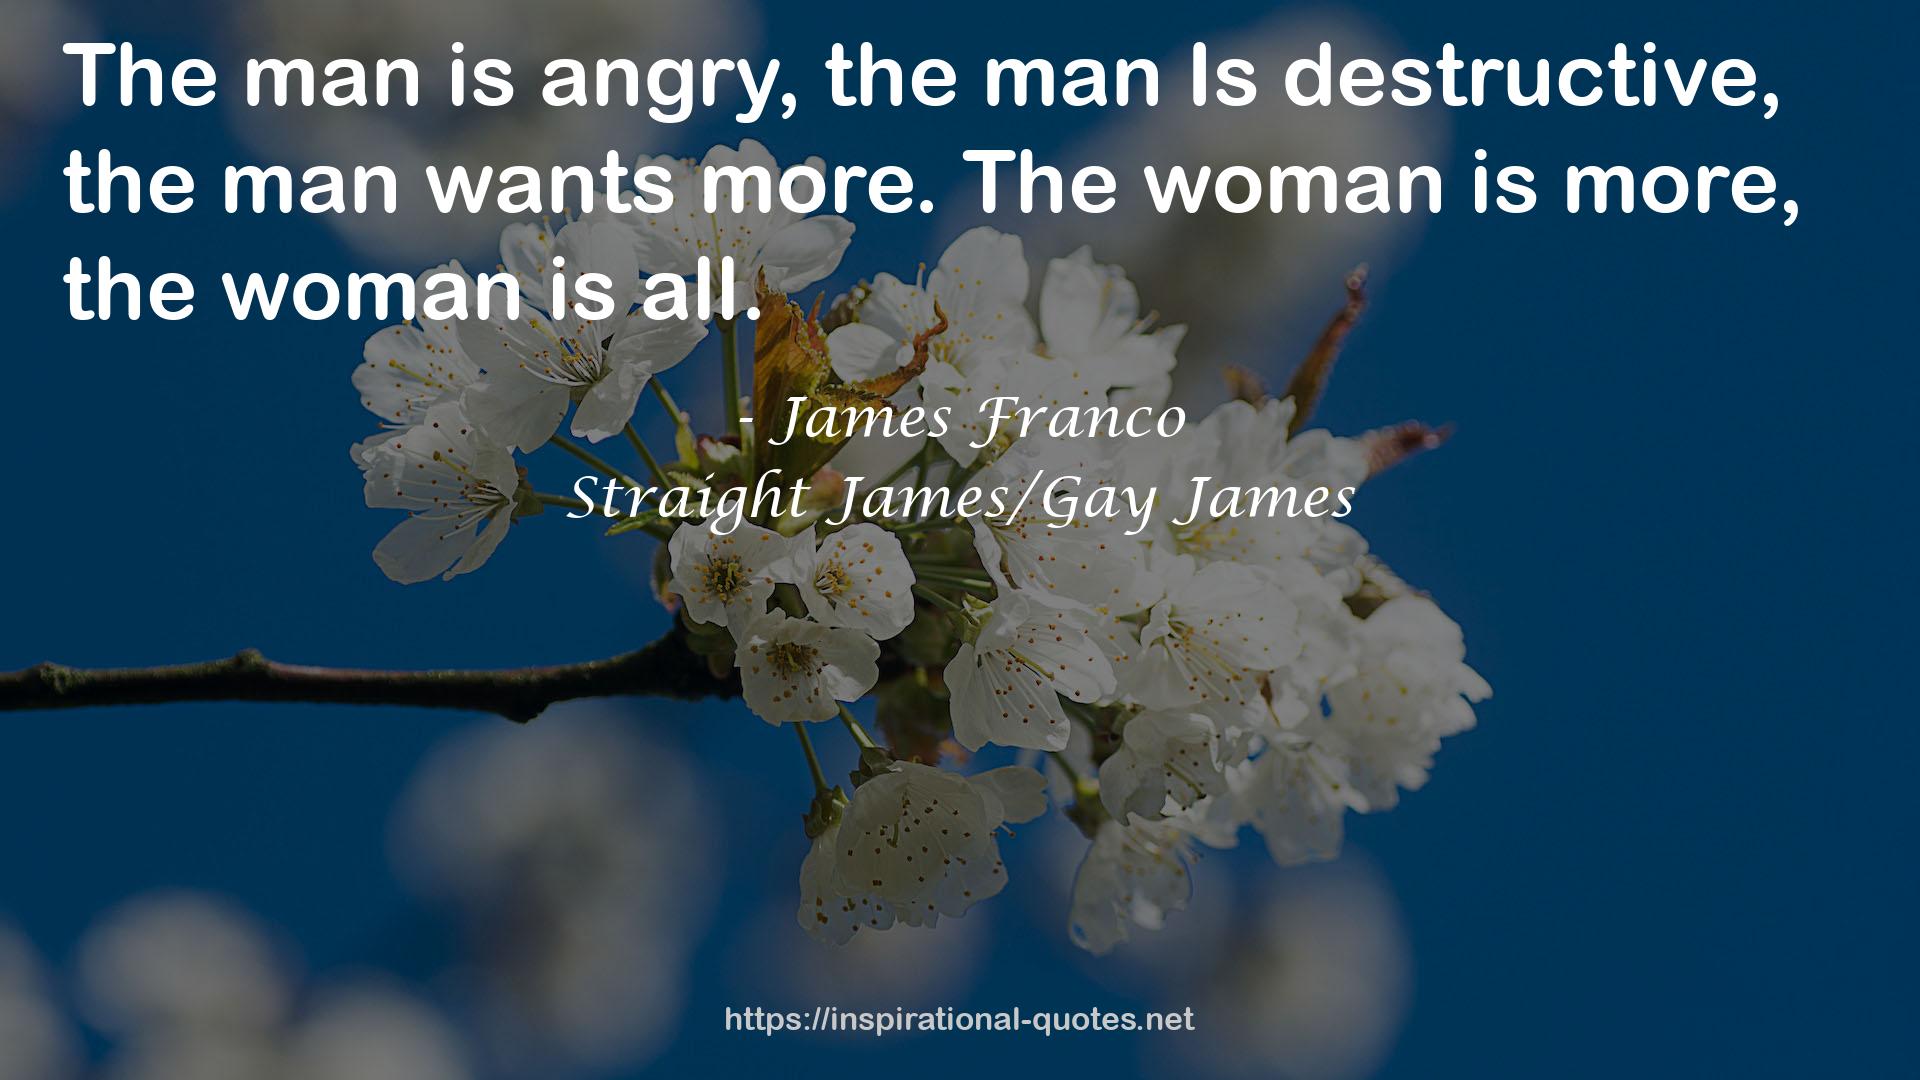 Straight James/Gay James QUOTES